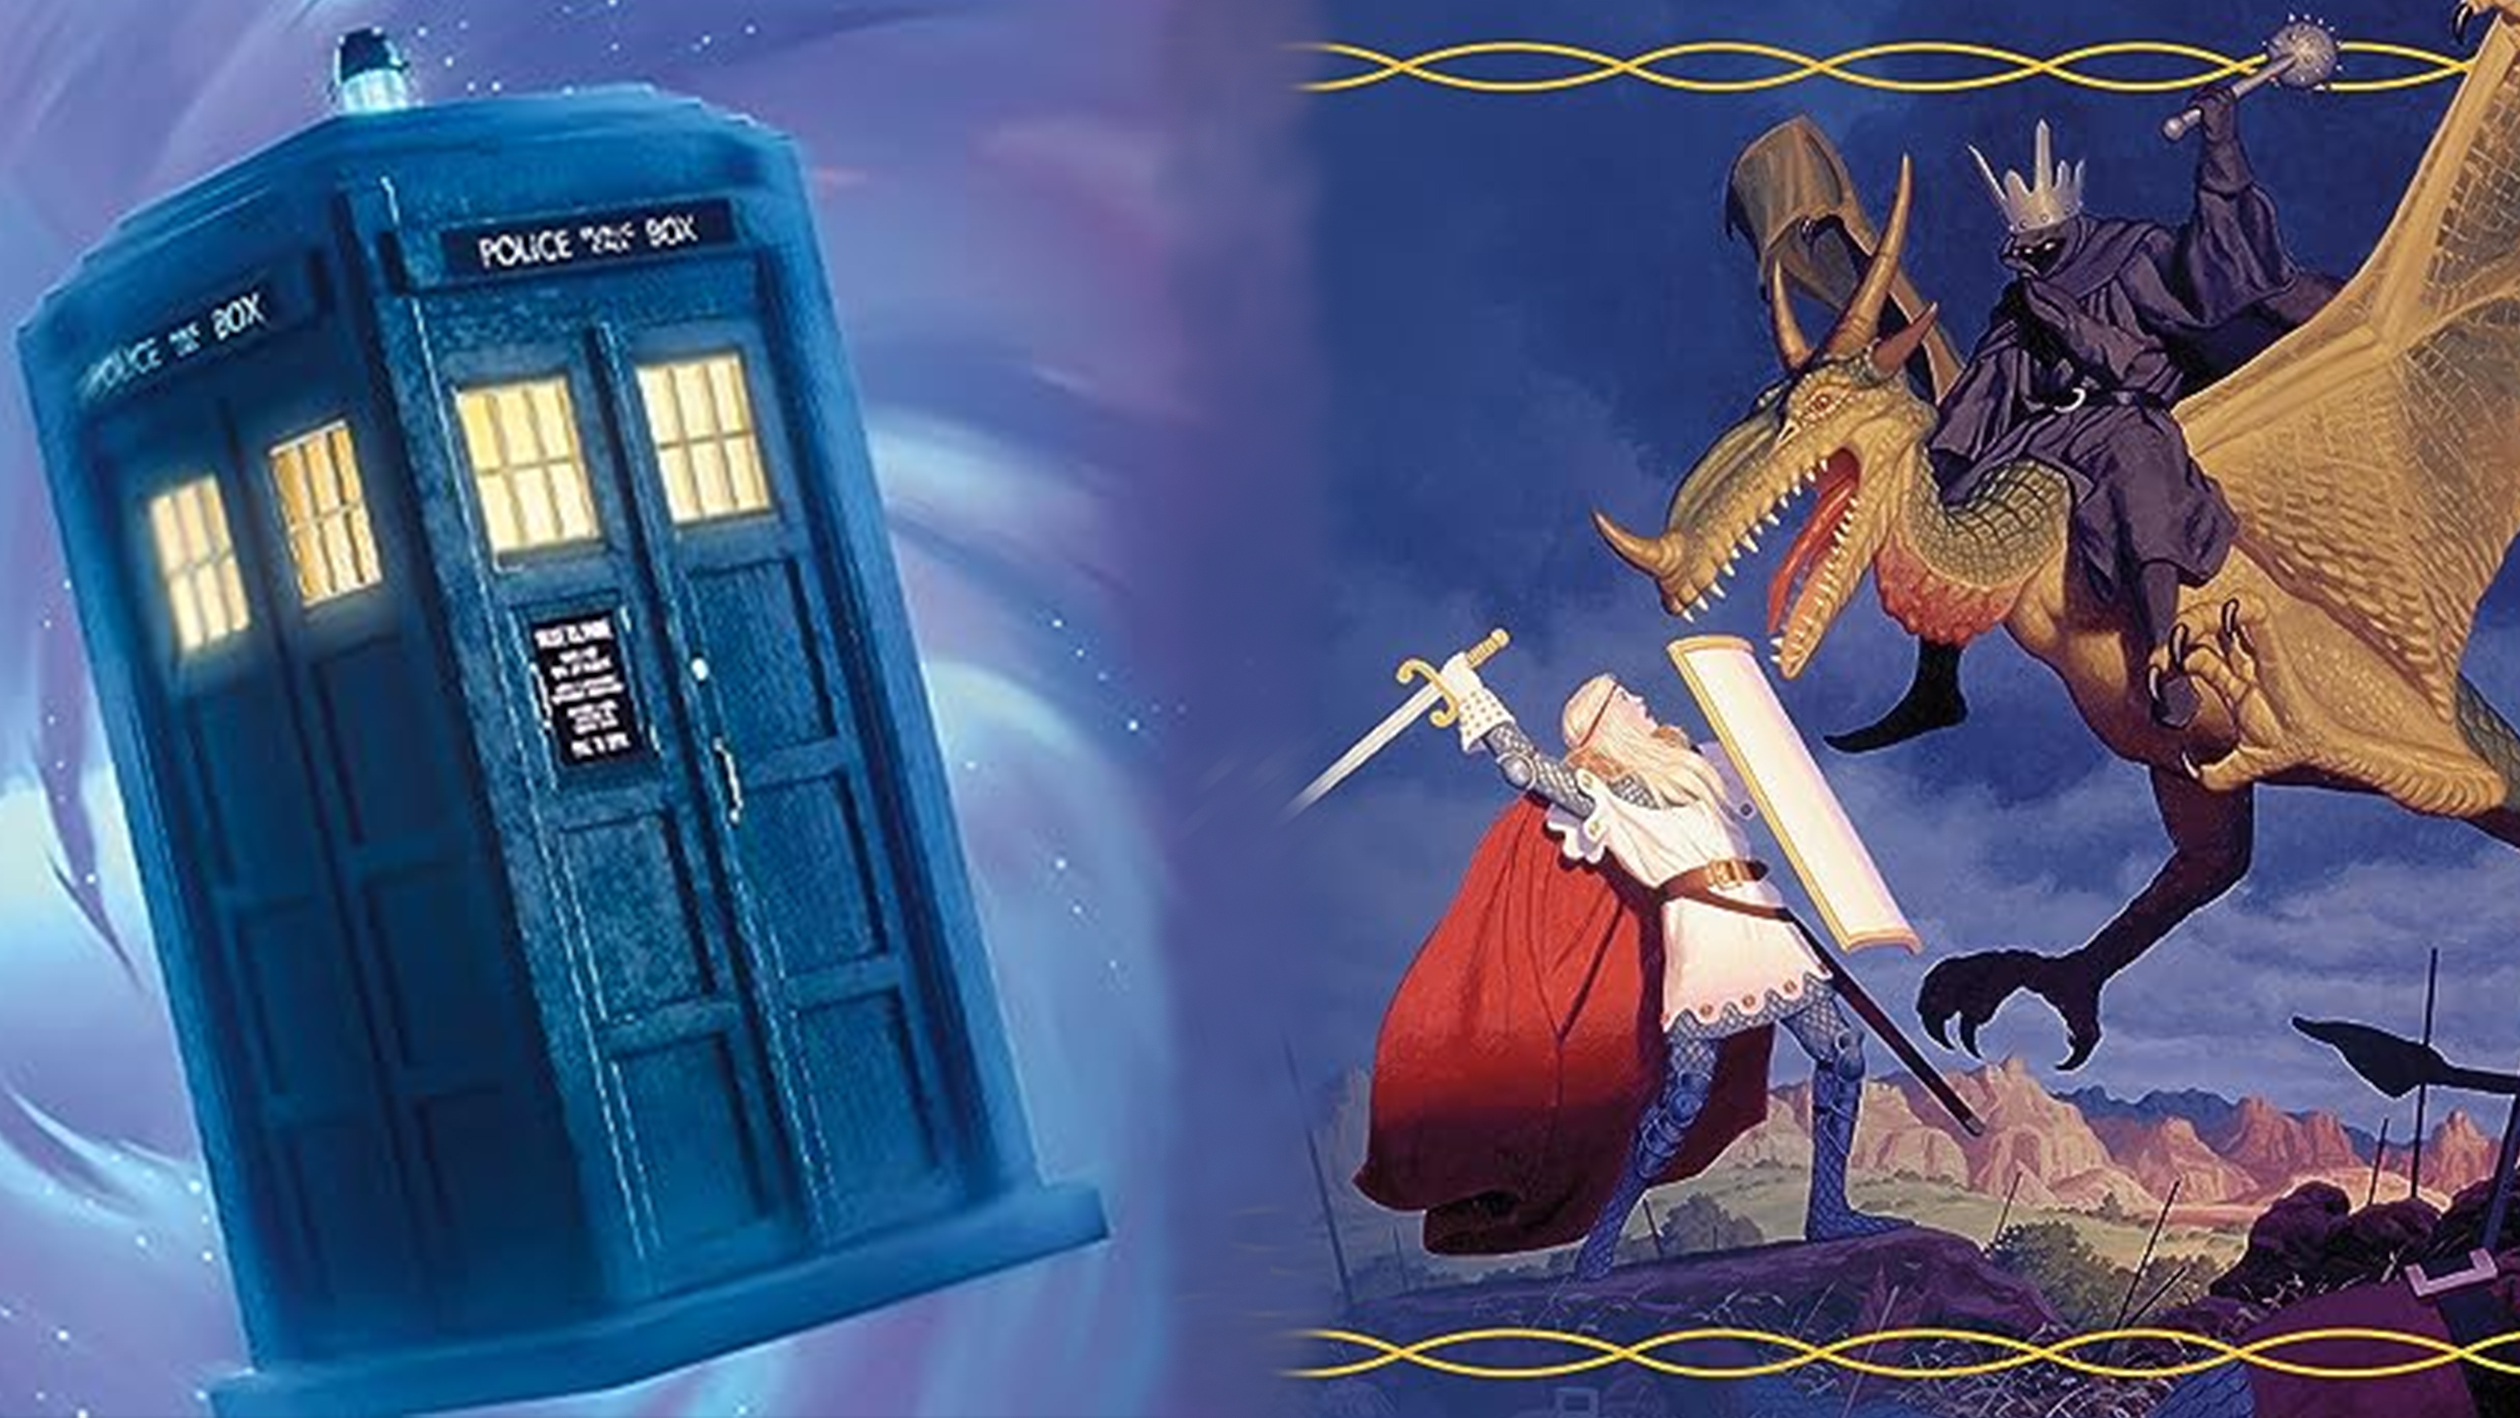 A composite image blending the key art for the Dr. Who and The Lord of the Rings Universes Beyond sets for Magic: The Gathering